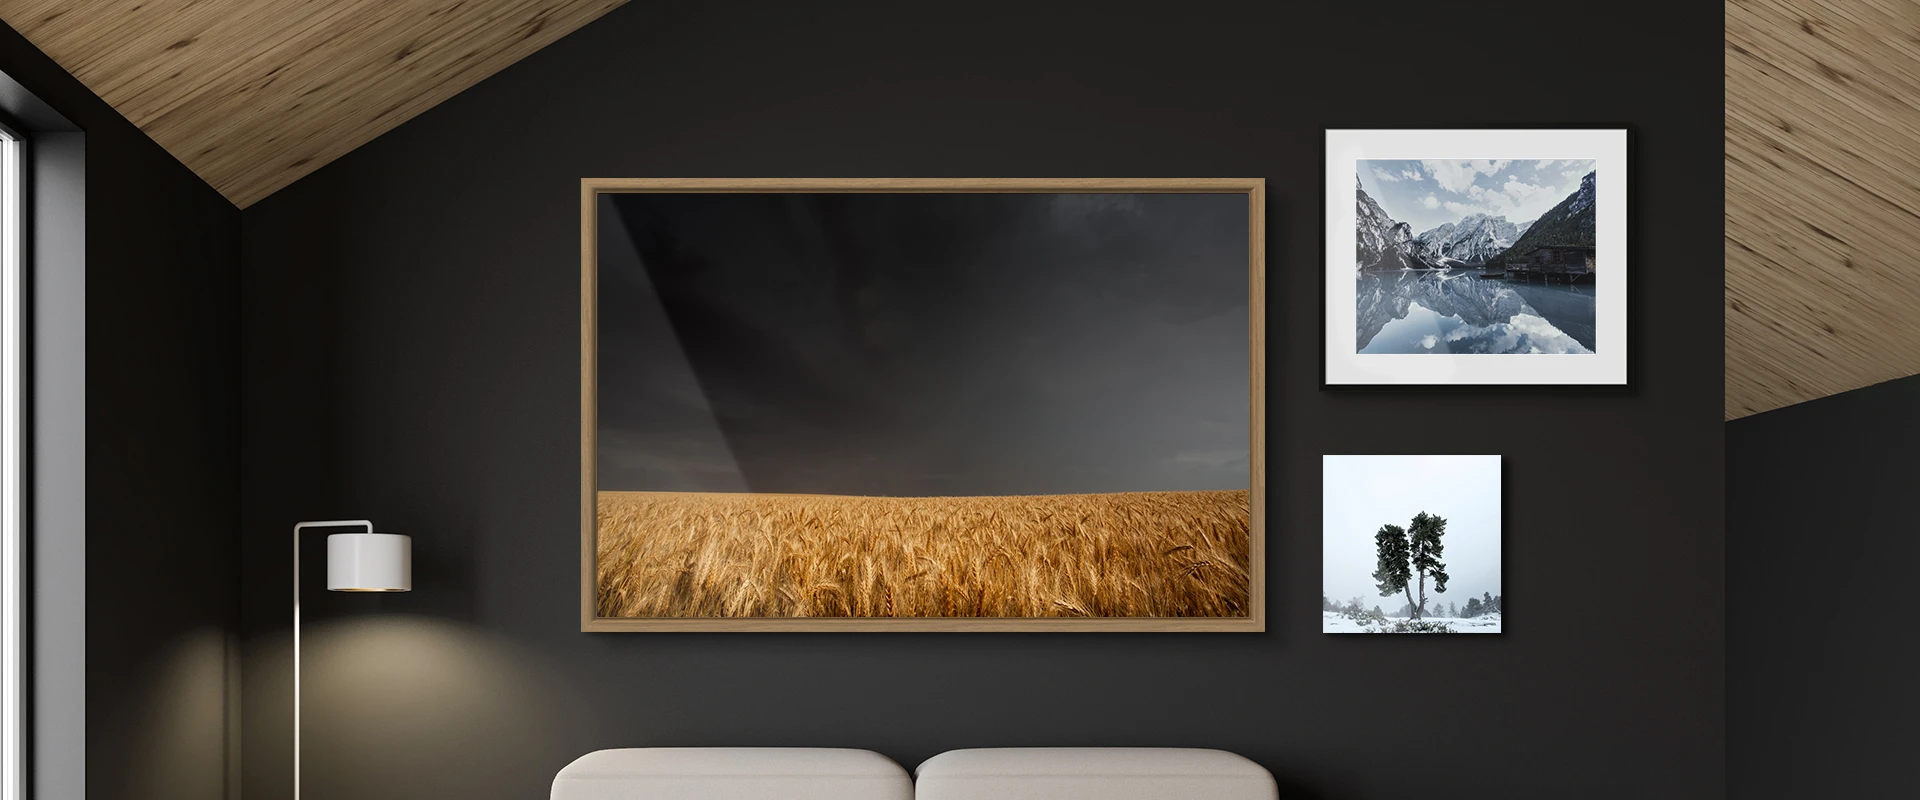 An example topic for a digital appointment is the visualisation and hanging. The image shows the selected motif printed and hanging on the wall next to other framed prints.